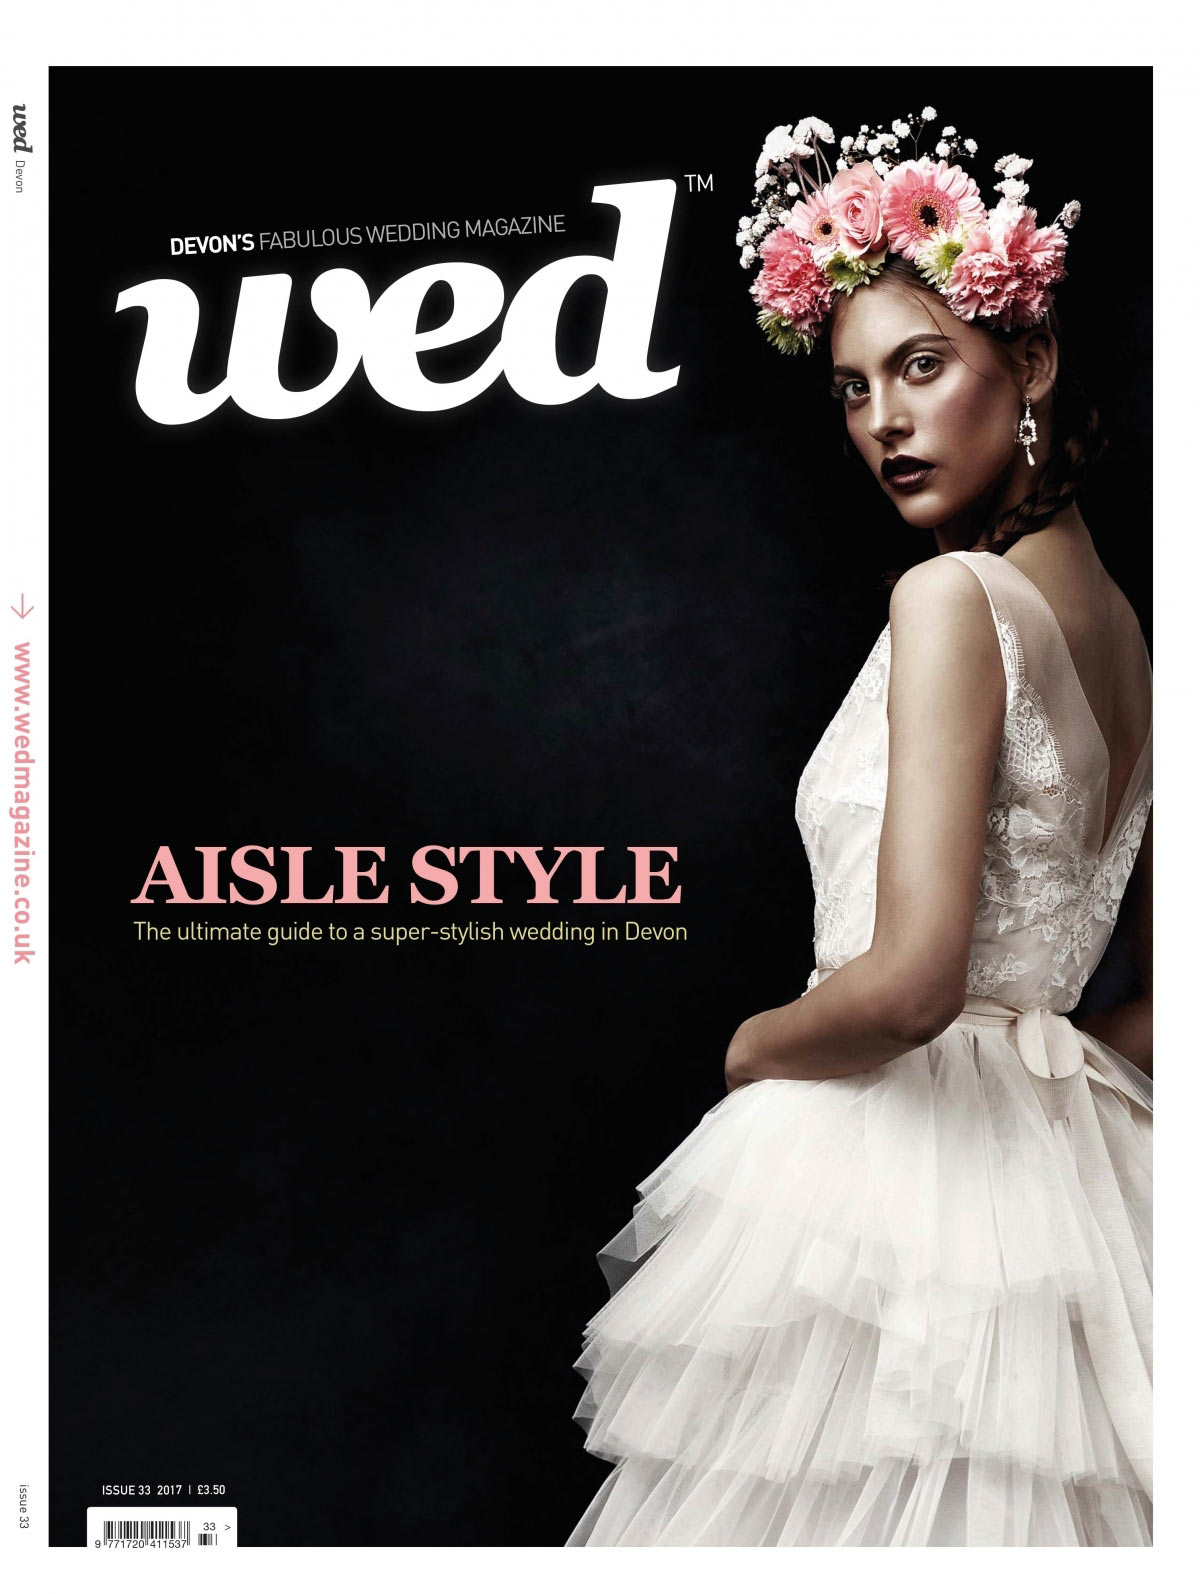 New Devon WED out now!